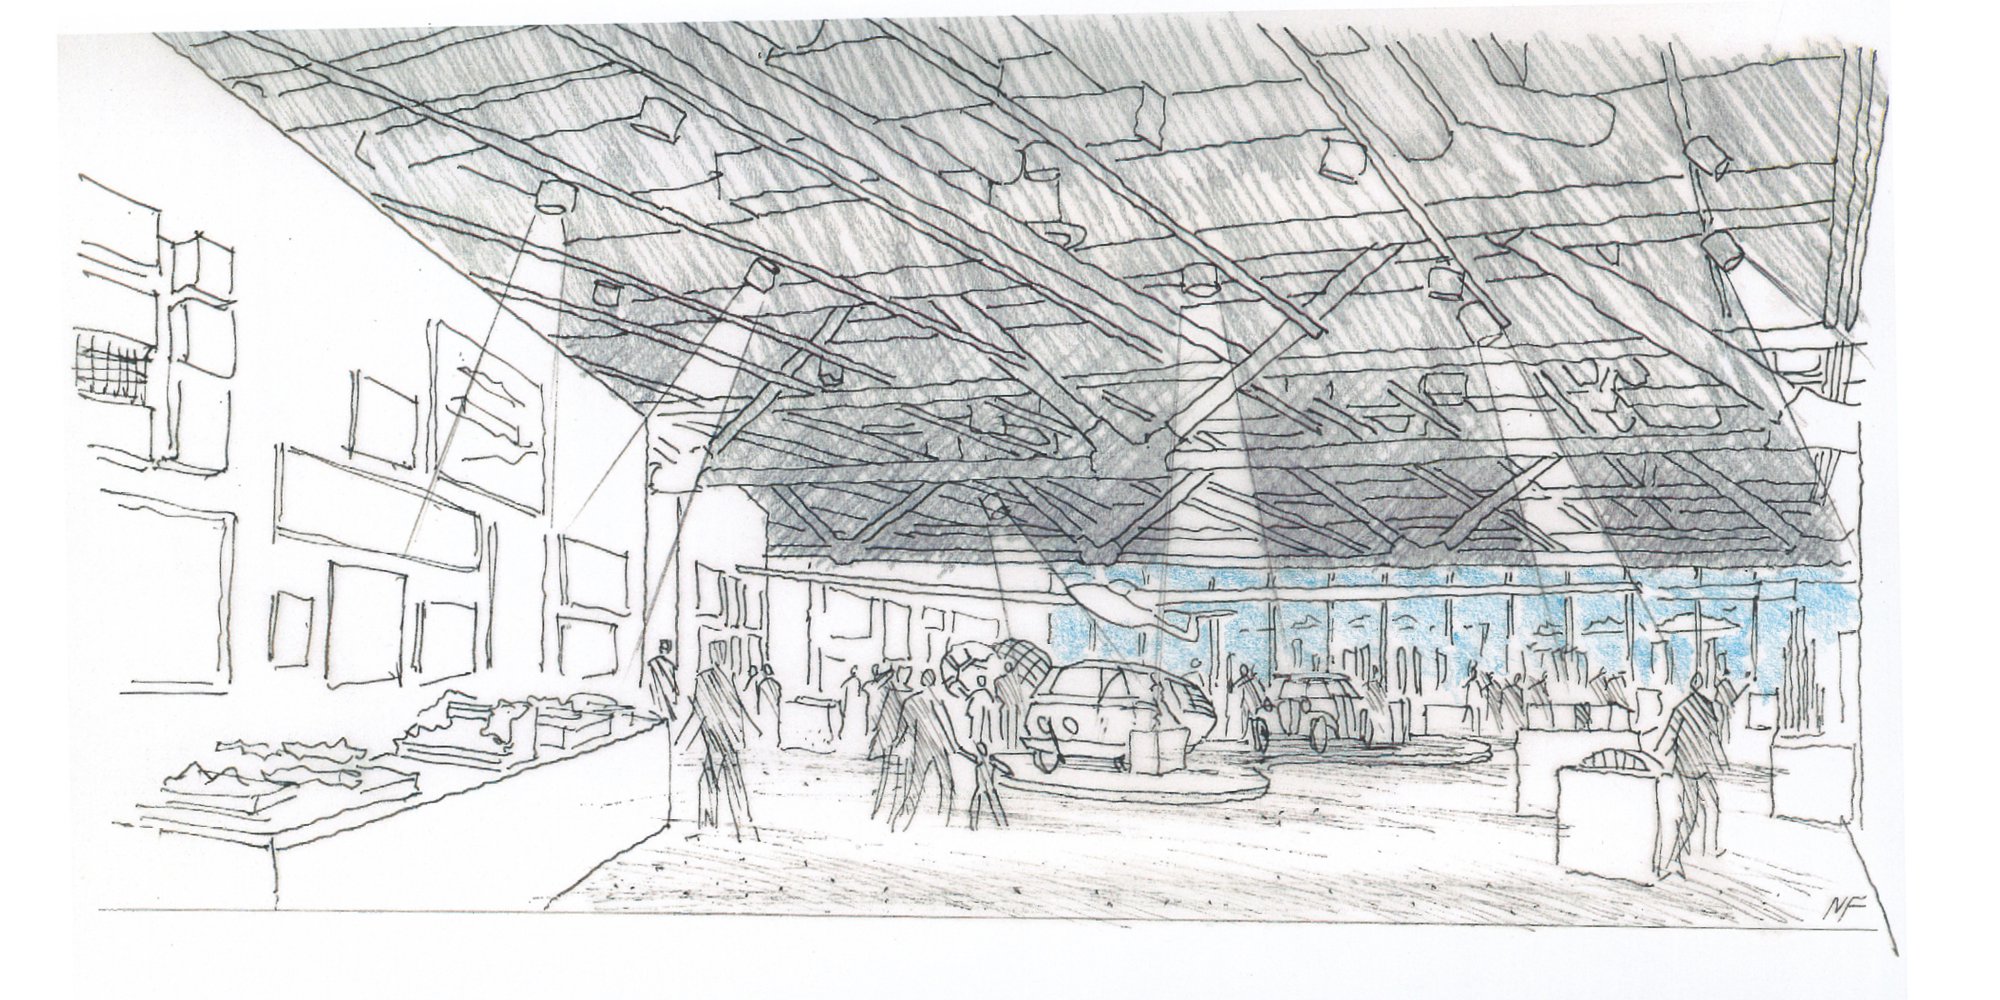 A sketch by Norman Foster, imagining the exhibition space at the Centre Pompidou. It shows the central gallery space, with a range of models, drawings, artworks and objects in 'Nature and Urbanity' and 'Skin and Bones,' including the Glasflügel H-201B Standard Libelle glider - which is hung from the ceiling - and Buckminster Fuller's Dymaxion Car #4. 